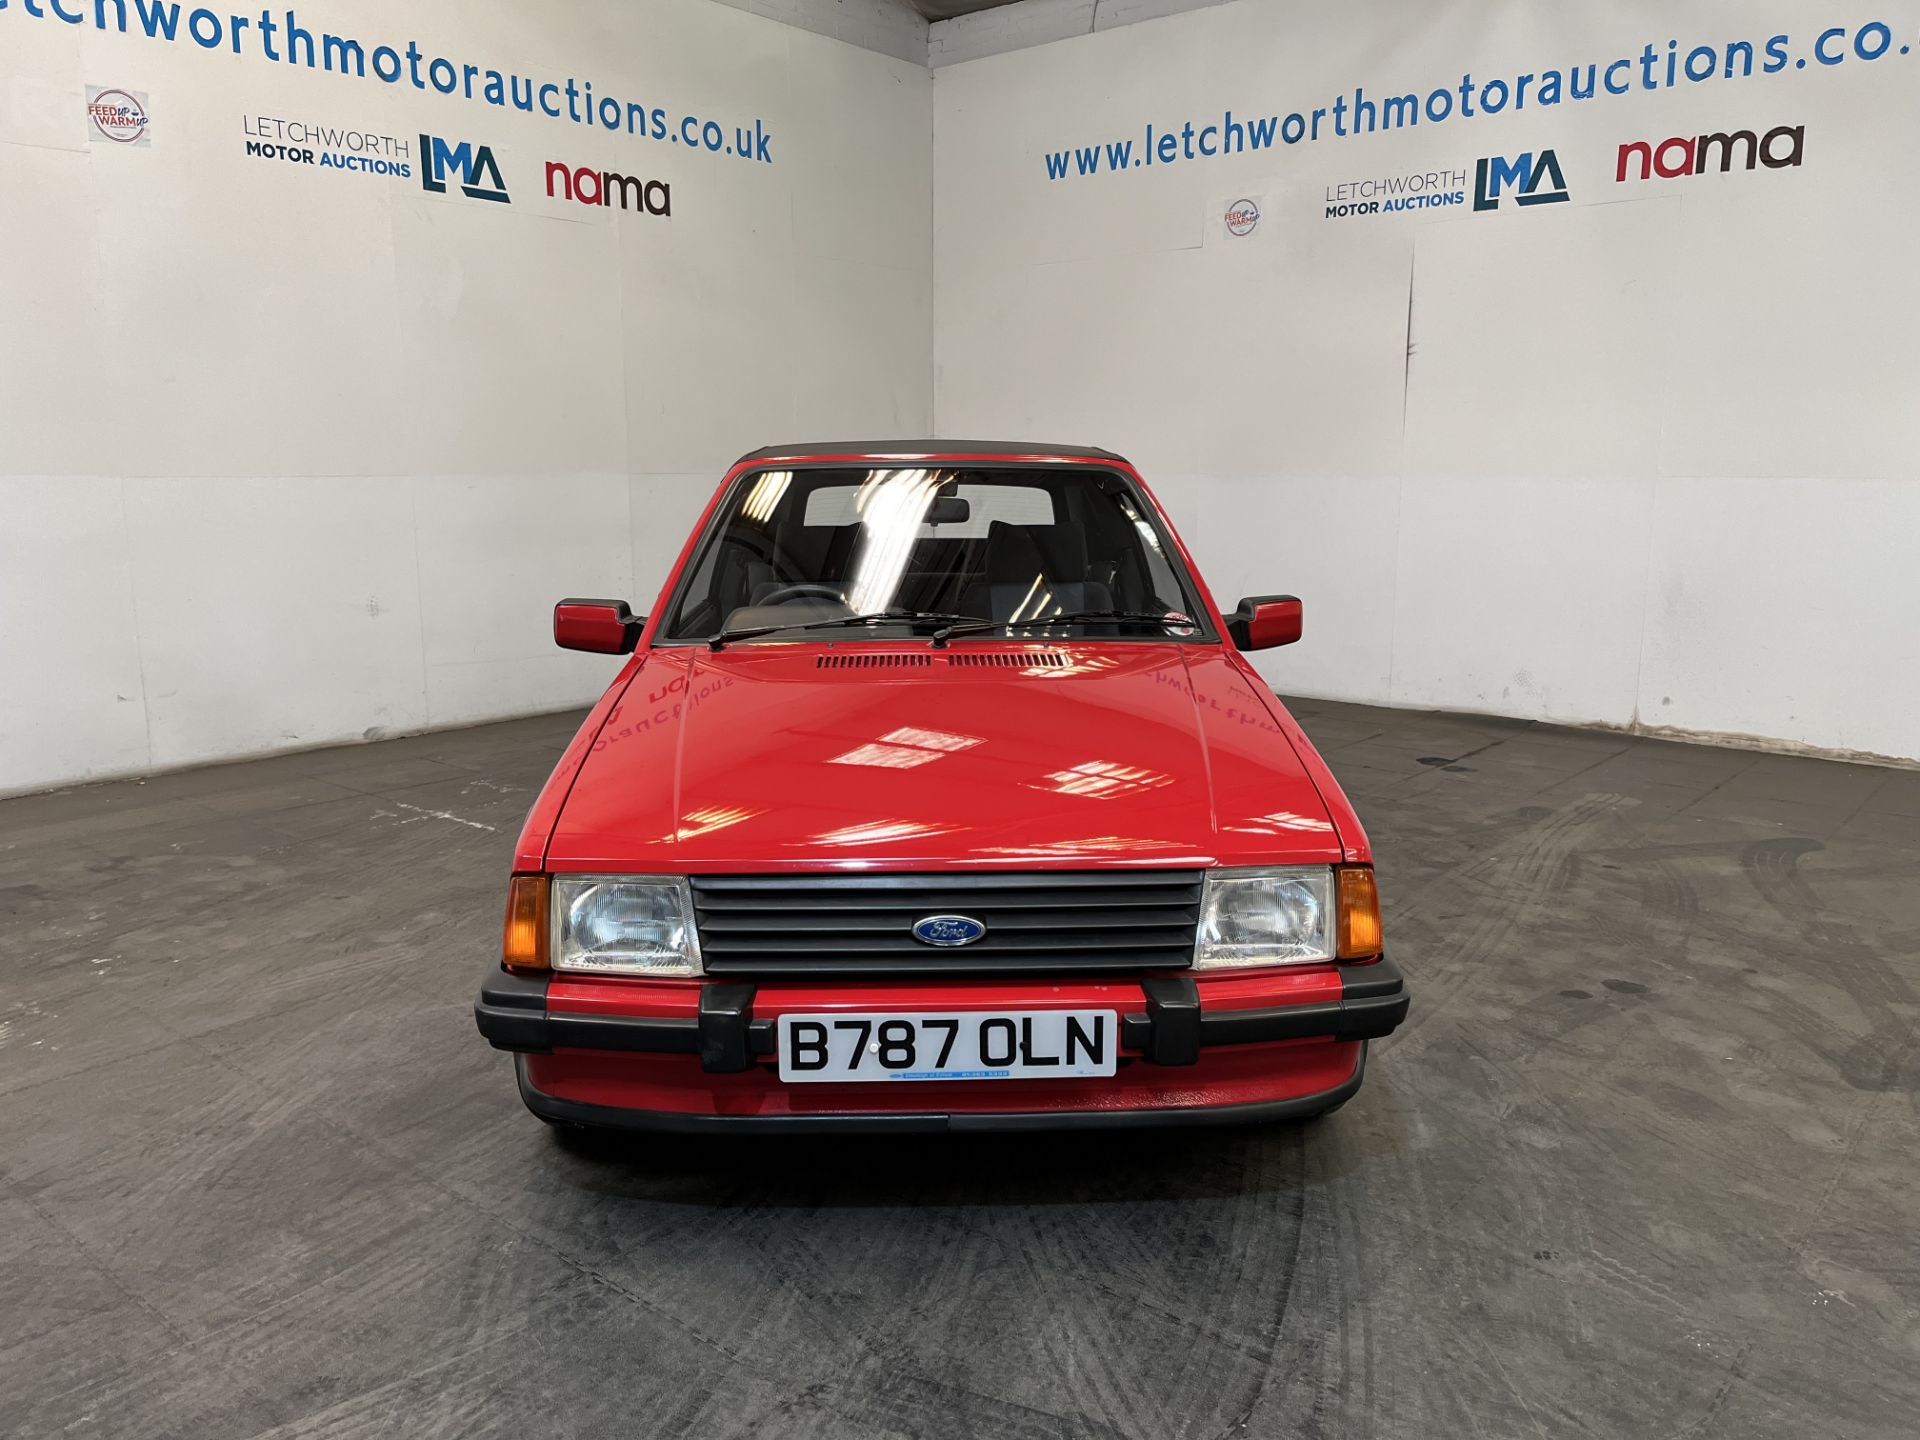 1985 Ford Escort 1.6i Cabriolet - 1597cc *ONE OWNER FROM NEW* - Image 3 of 24